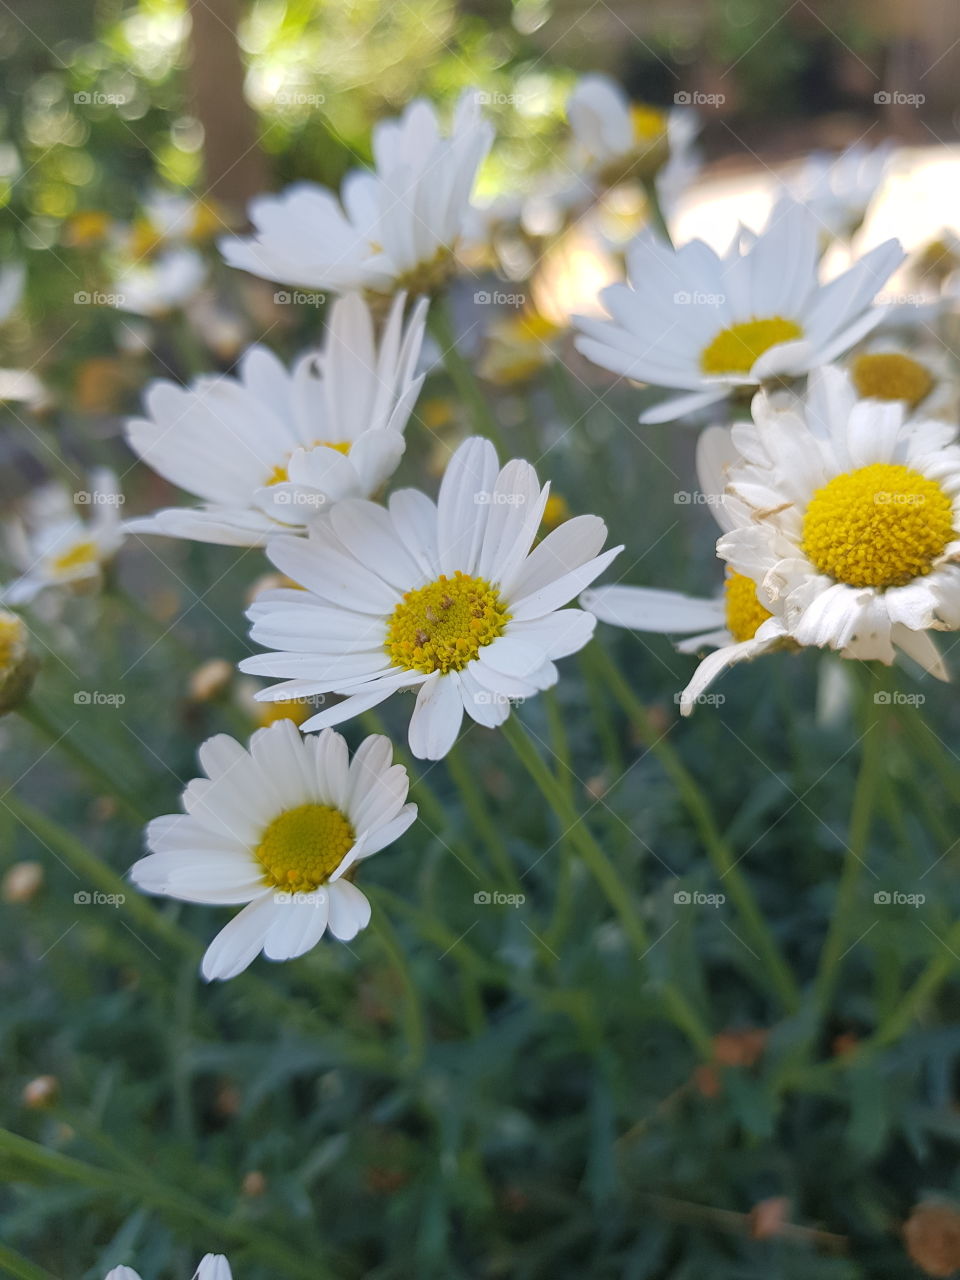 Another shot of the daisies in the garden!